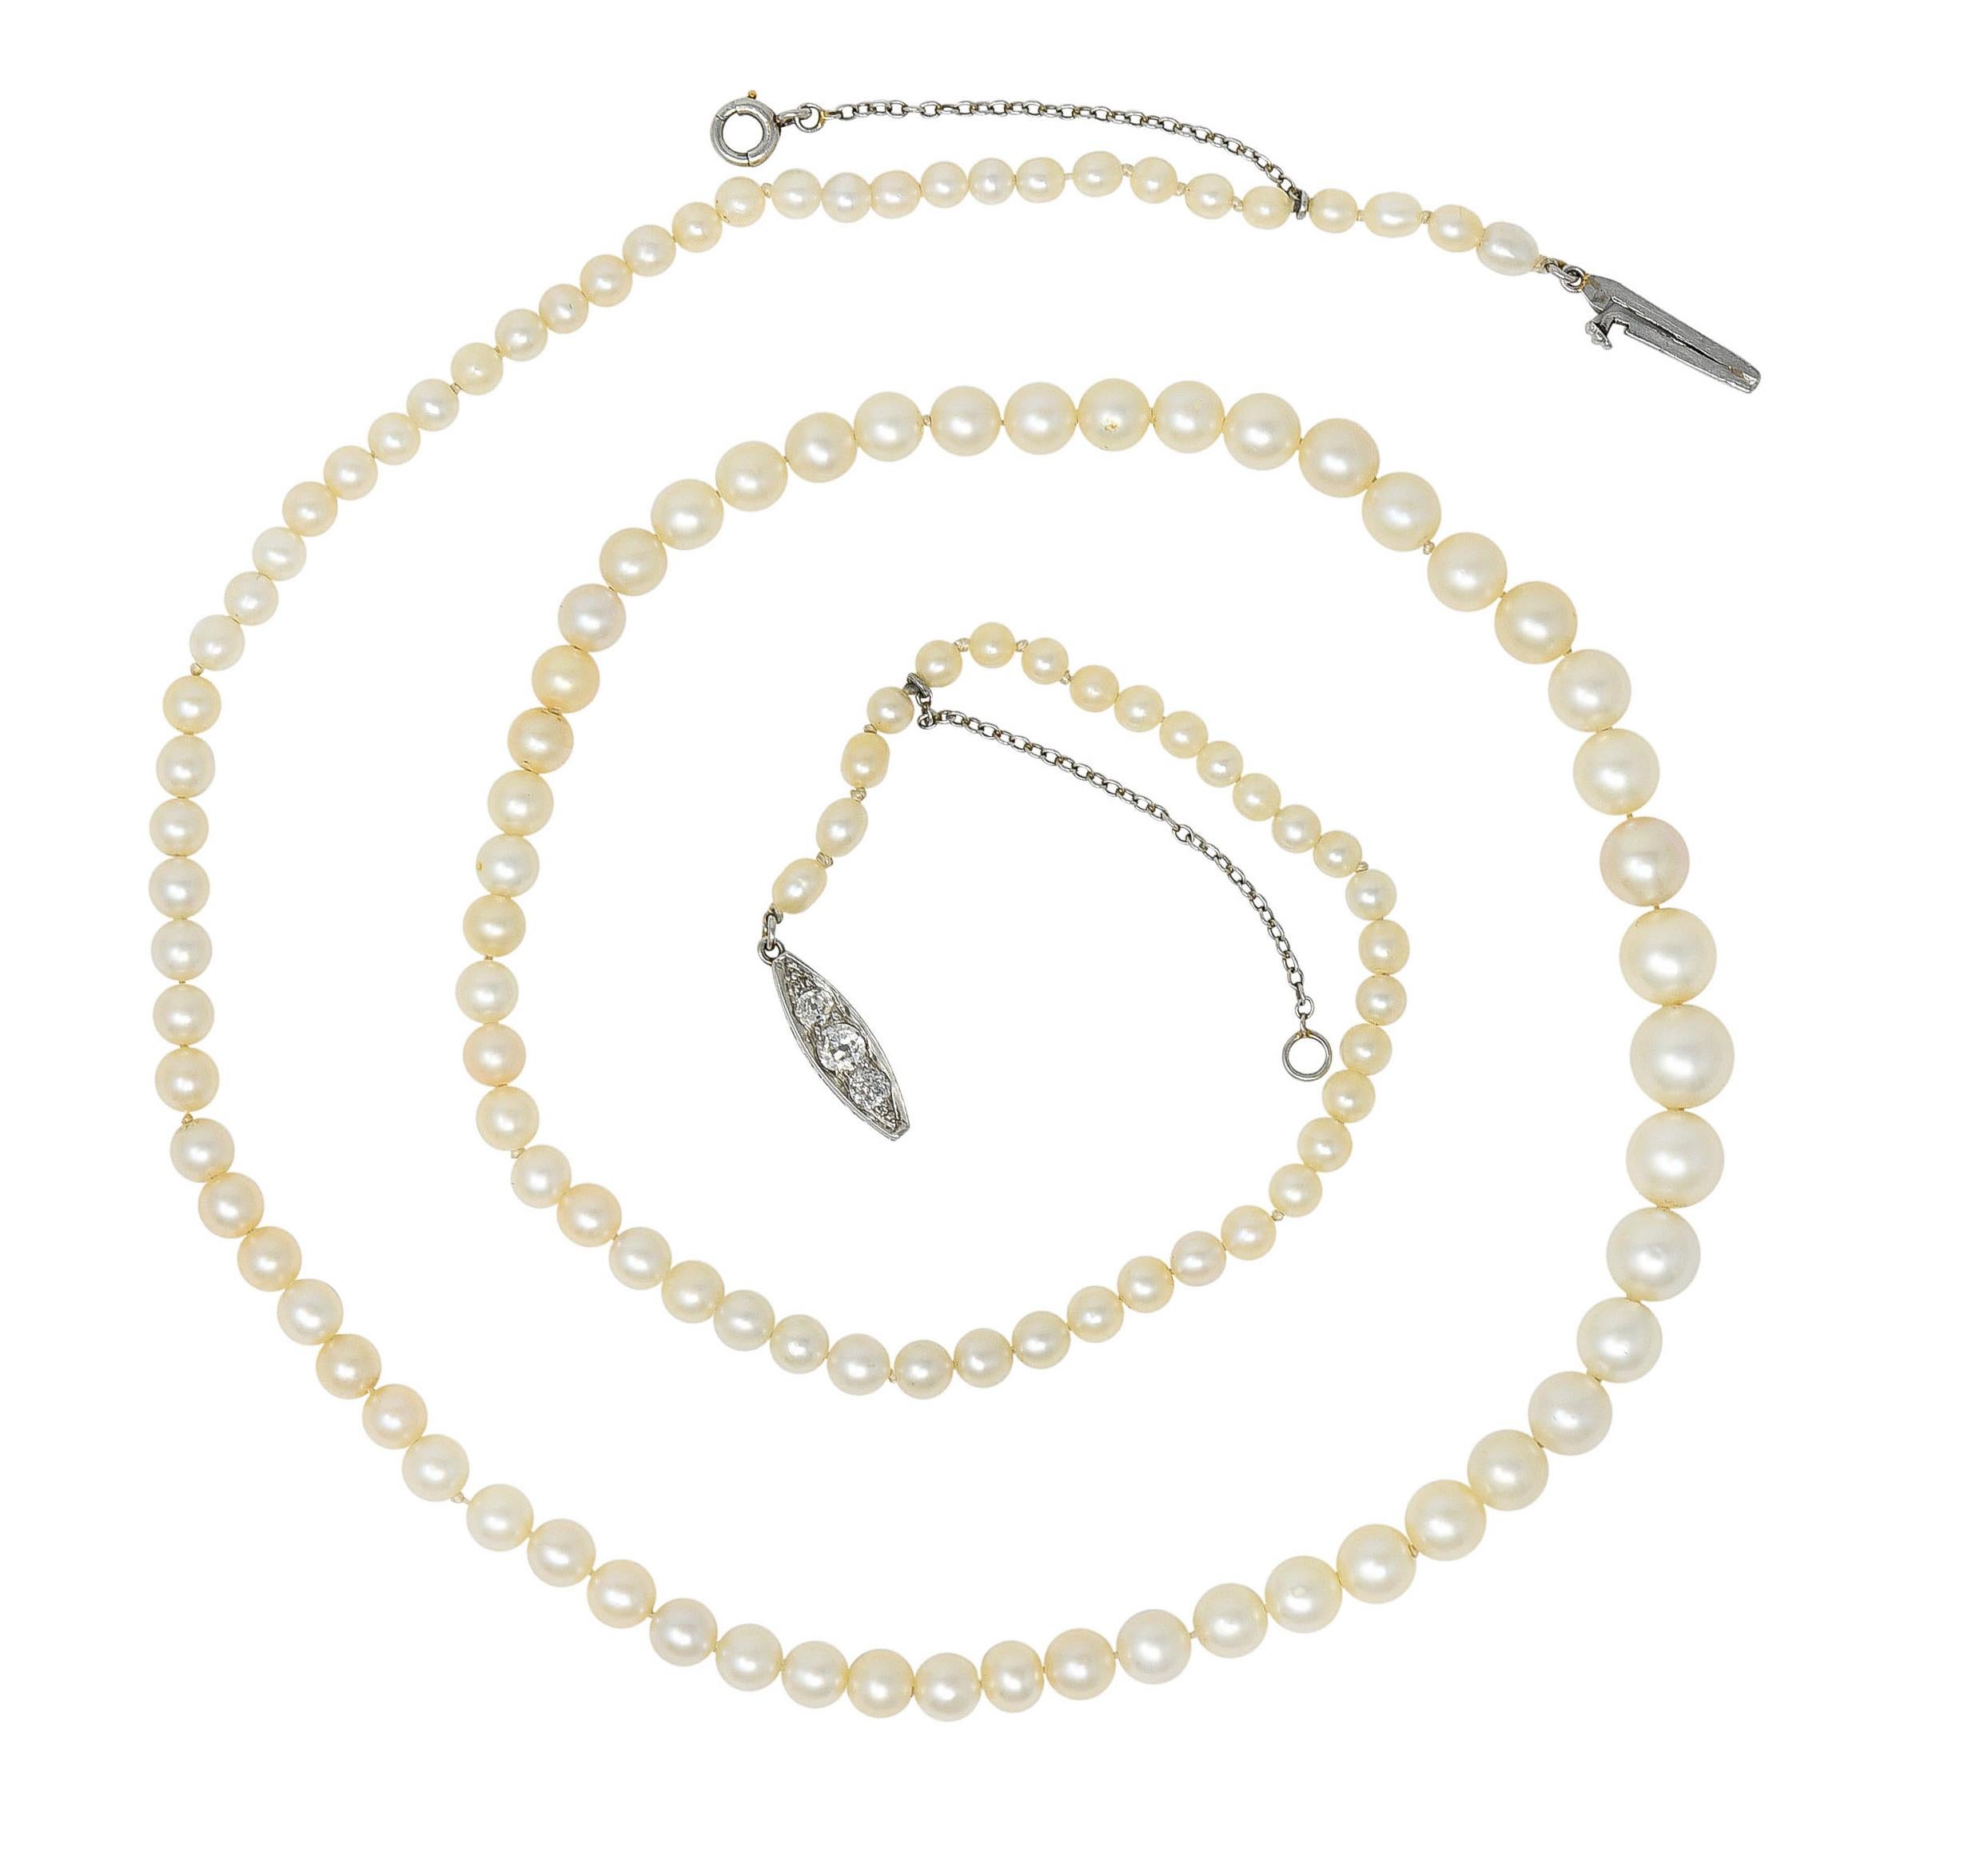 Strand necklace is comprised of natural freshwater pearls with some areas hand knotted

Pearls are round to oblong and graduate in size from 2.7 mm to 6.2 mm

Well matched cream body color with some exhibiting rosè overtones - all with very good to